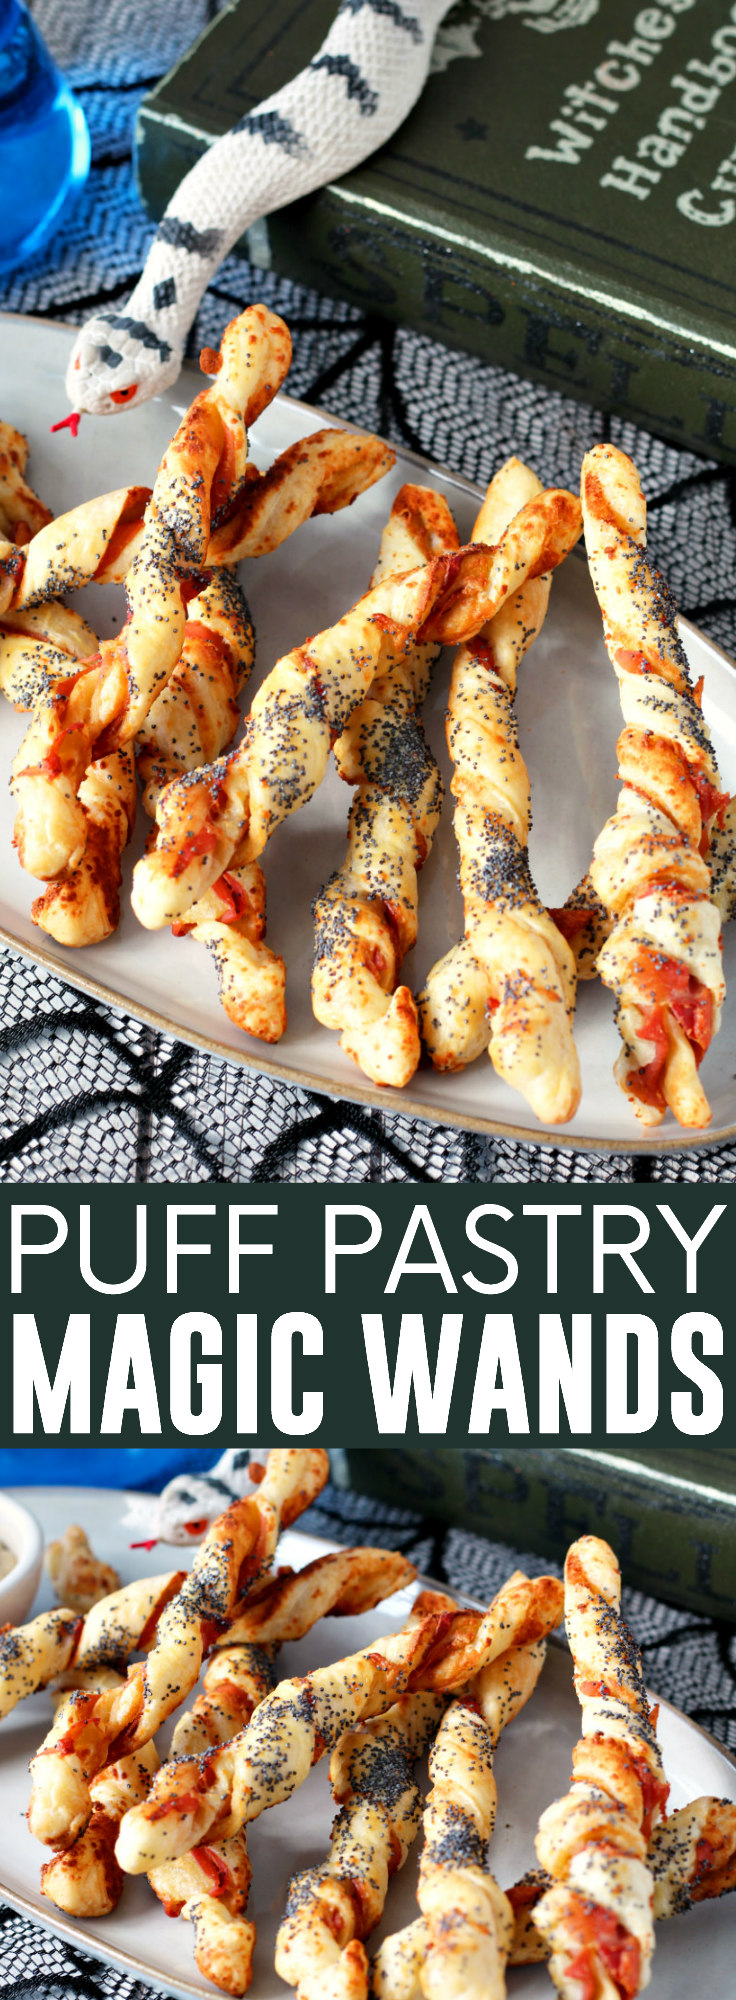 Puff Pastry Magic Wands pinnable image.